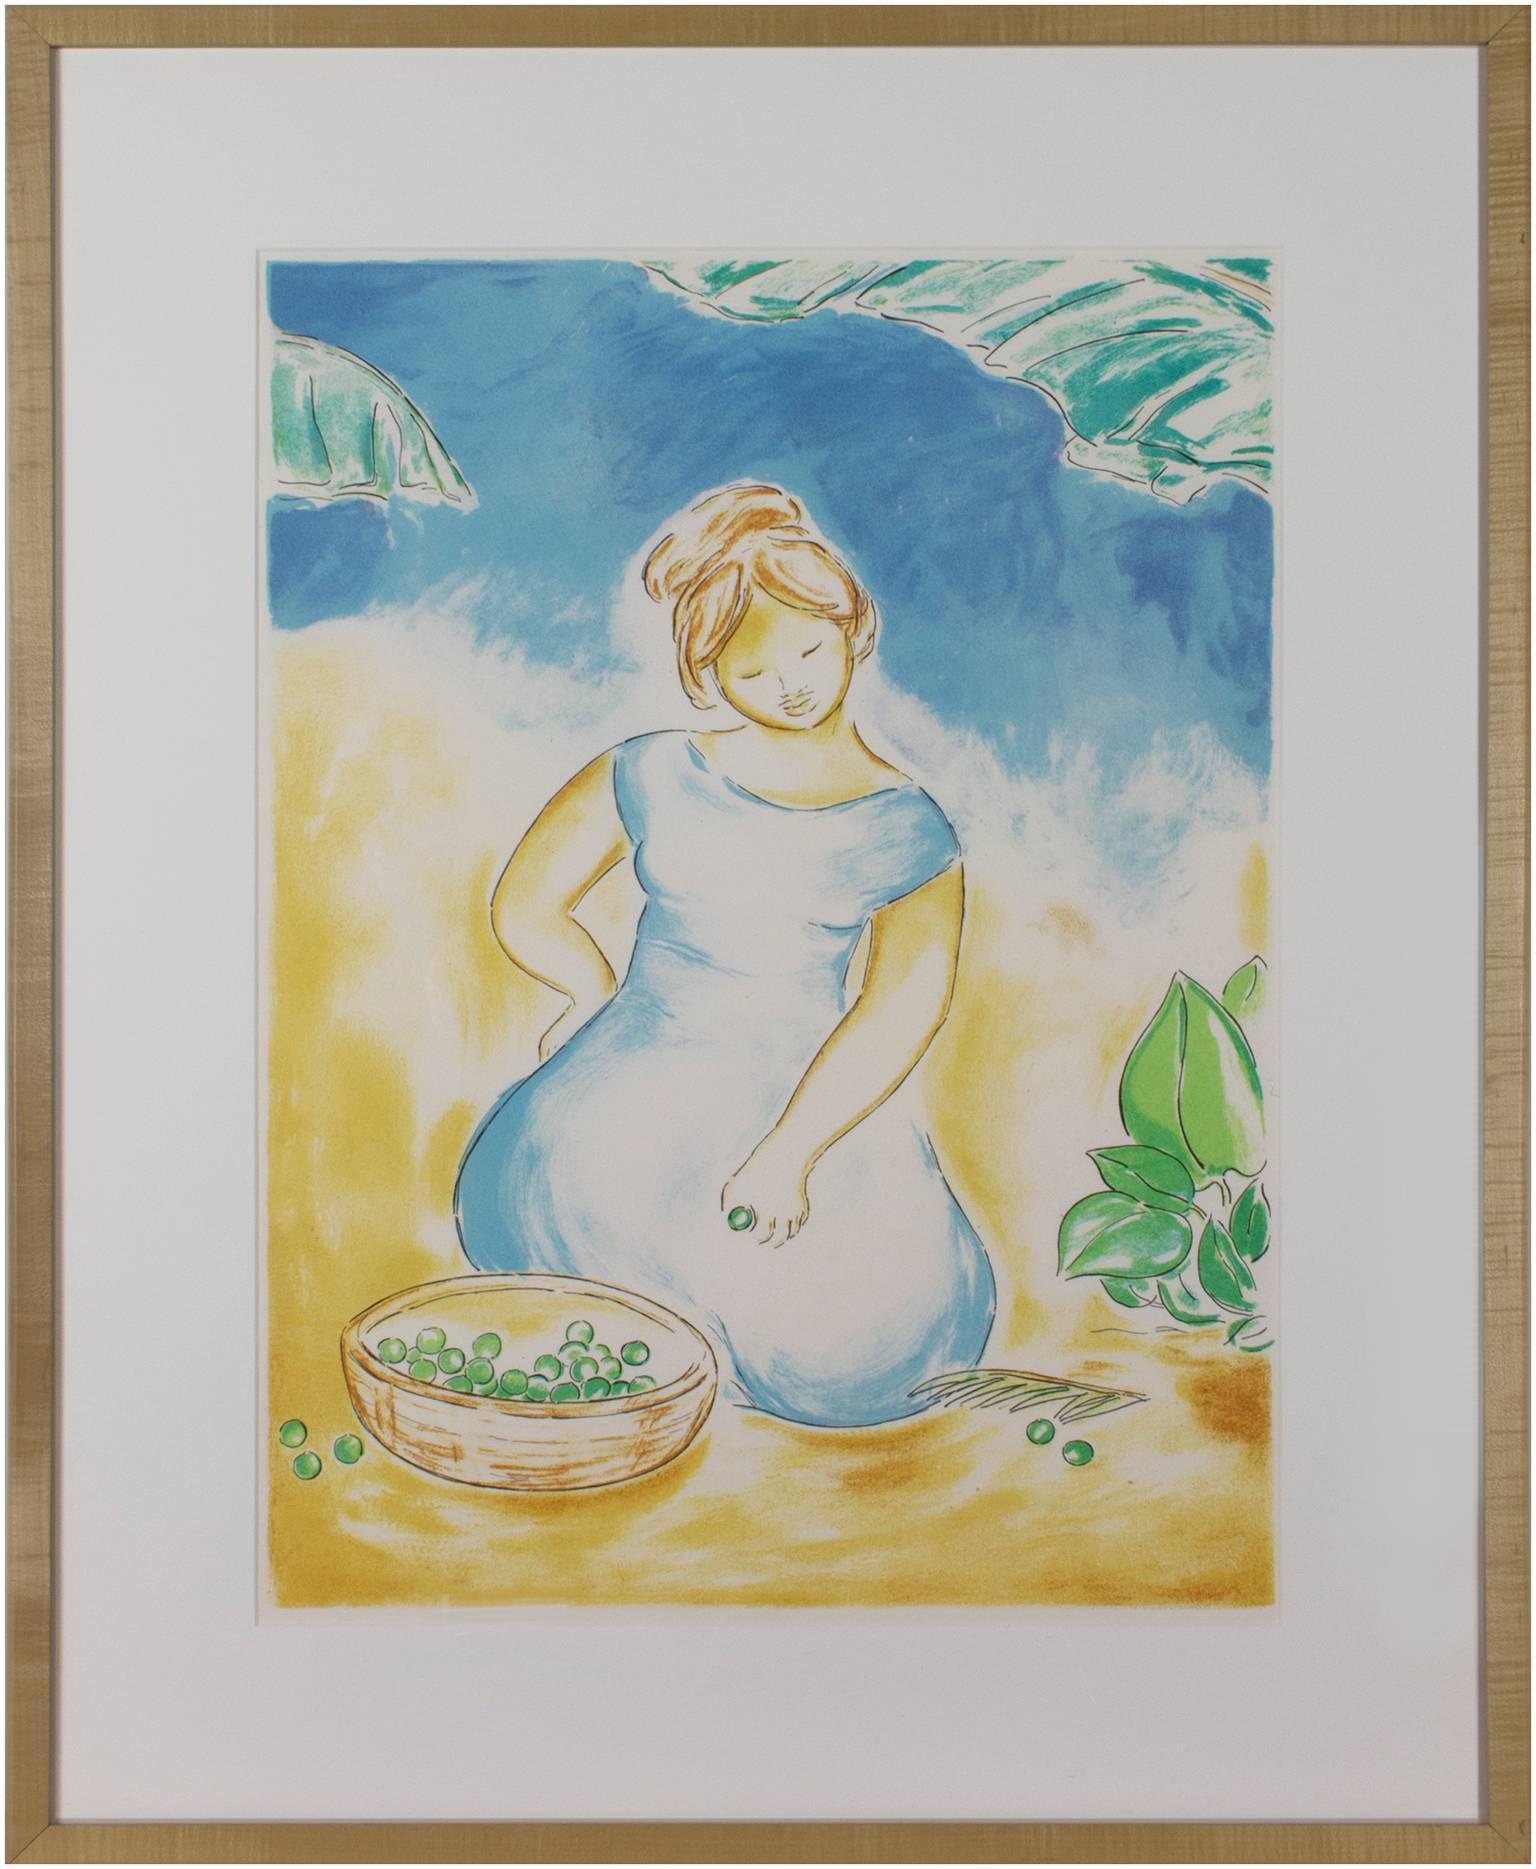 Angelika Thusius Figurative Print - "Untitled (Woman With Basket of Grapes), " Original Color Lithograph by A Thusius